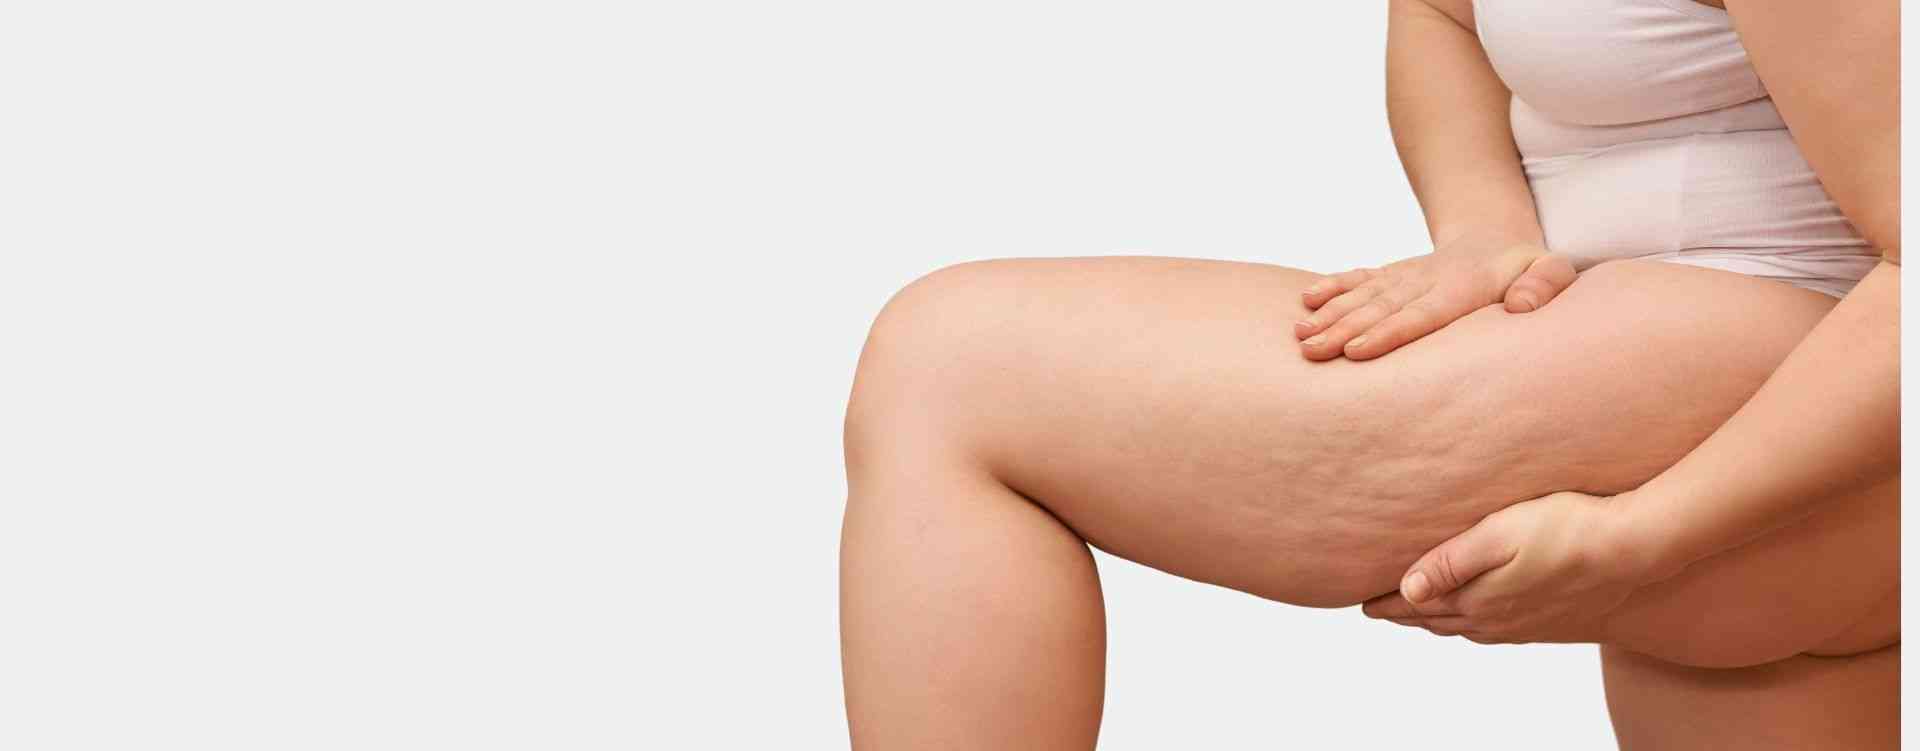 cellulite treatment in london phi clinic